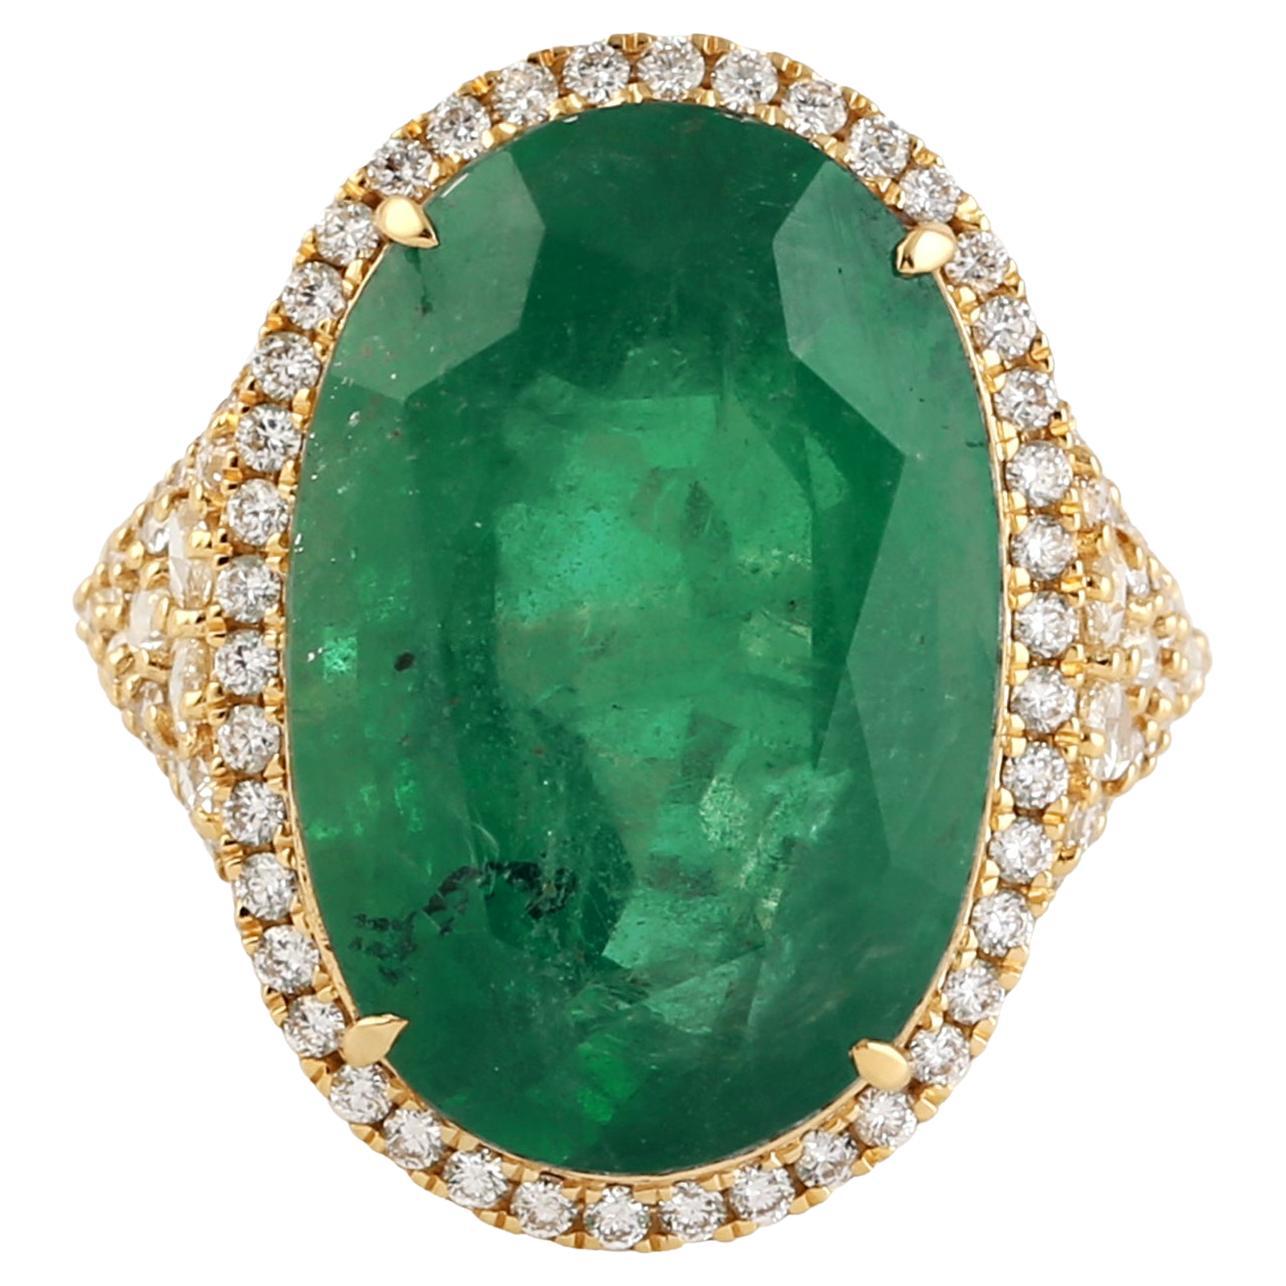 Oval Shaped Emerald Cocktail Ring With Pave Diamonds Made In 18k Yellow Gold